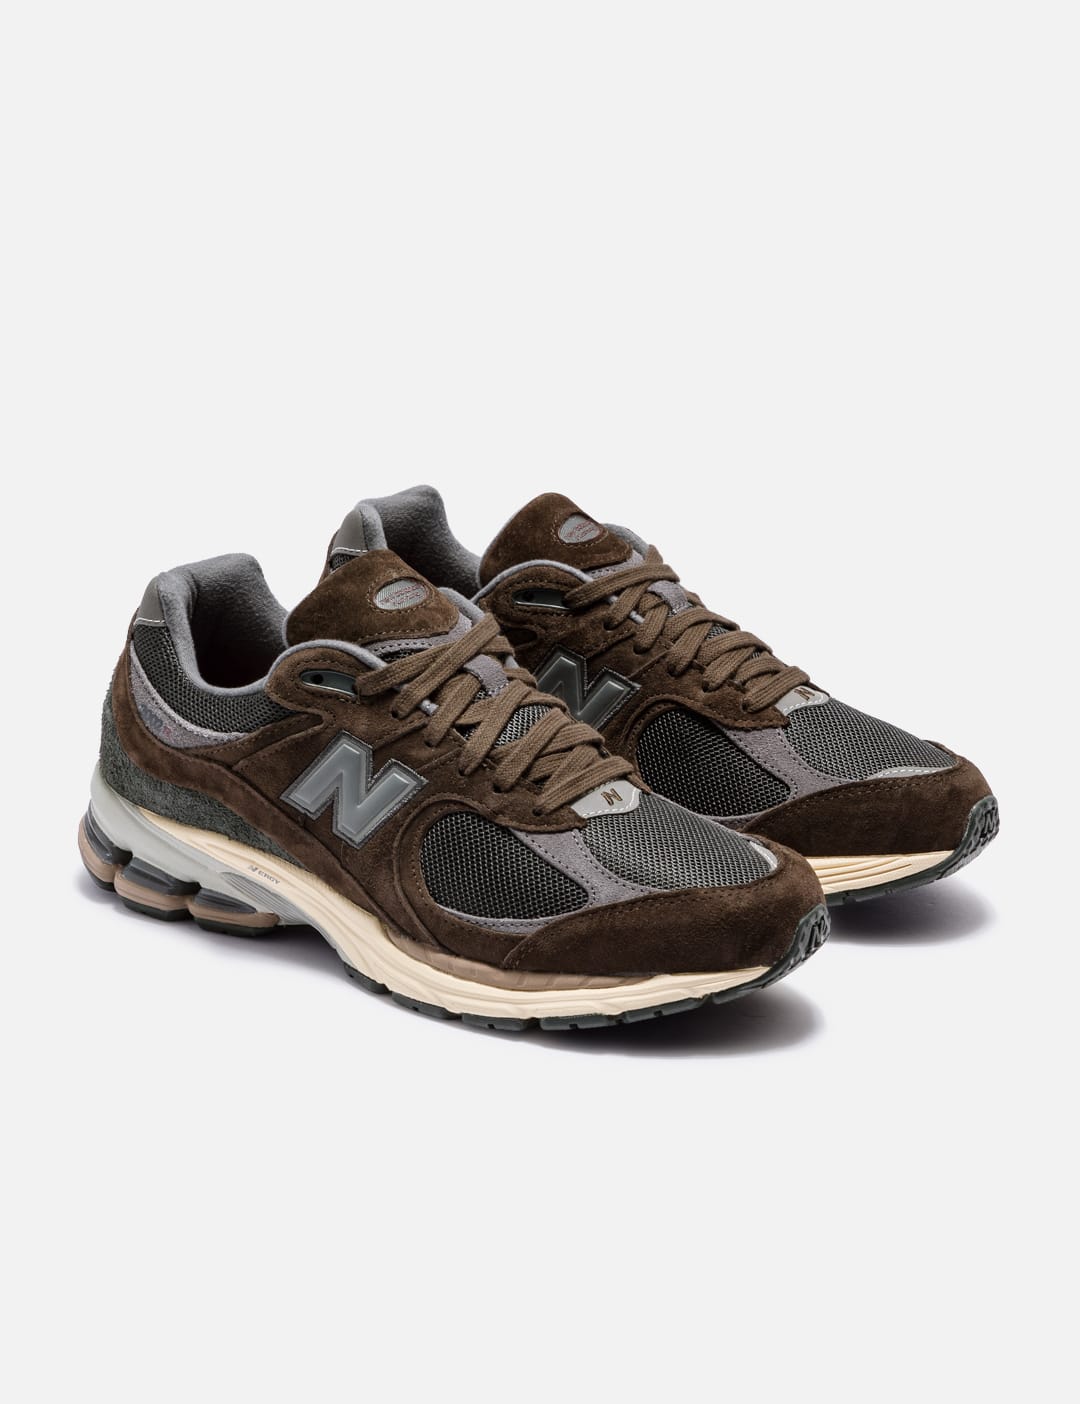 New Balance - 2002R | HBX - Globally Curated Fashion and Lifestyle